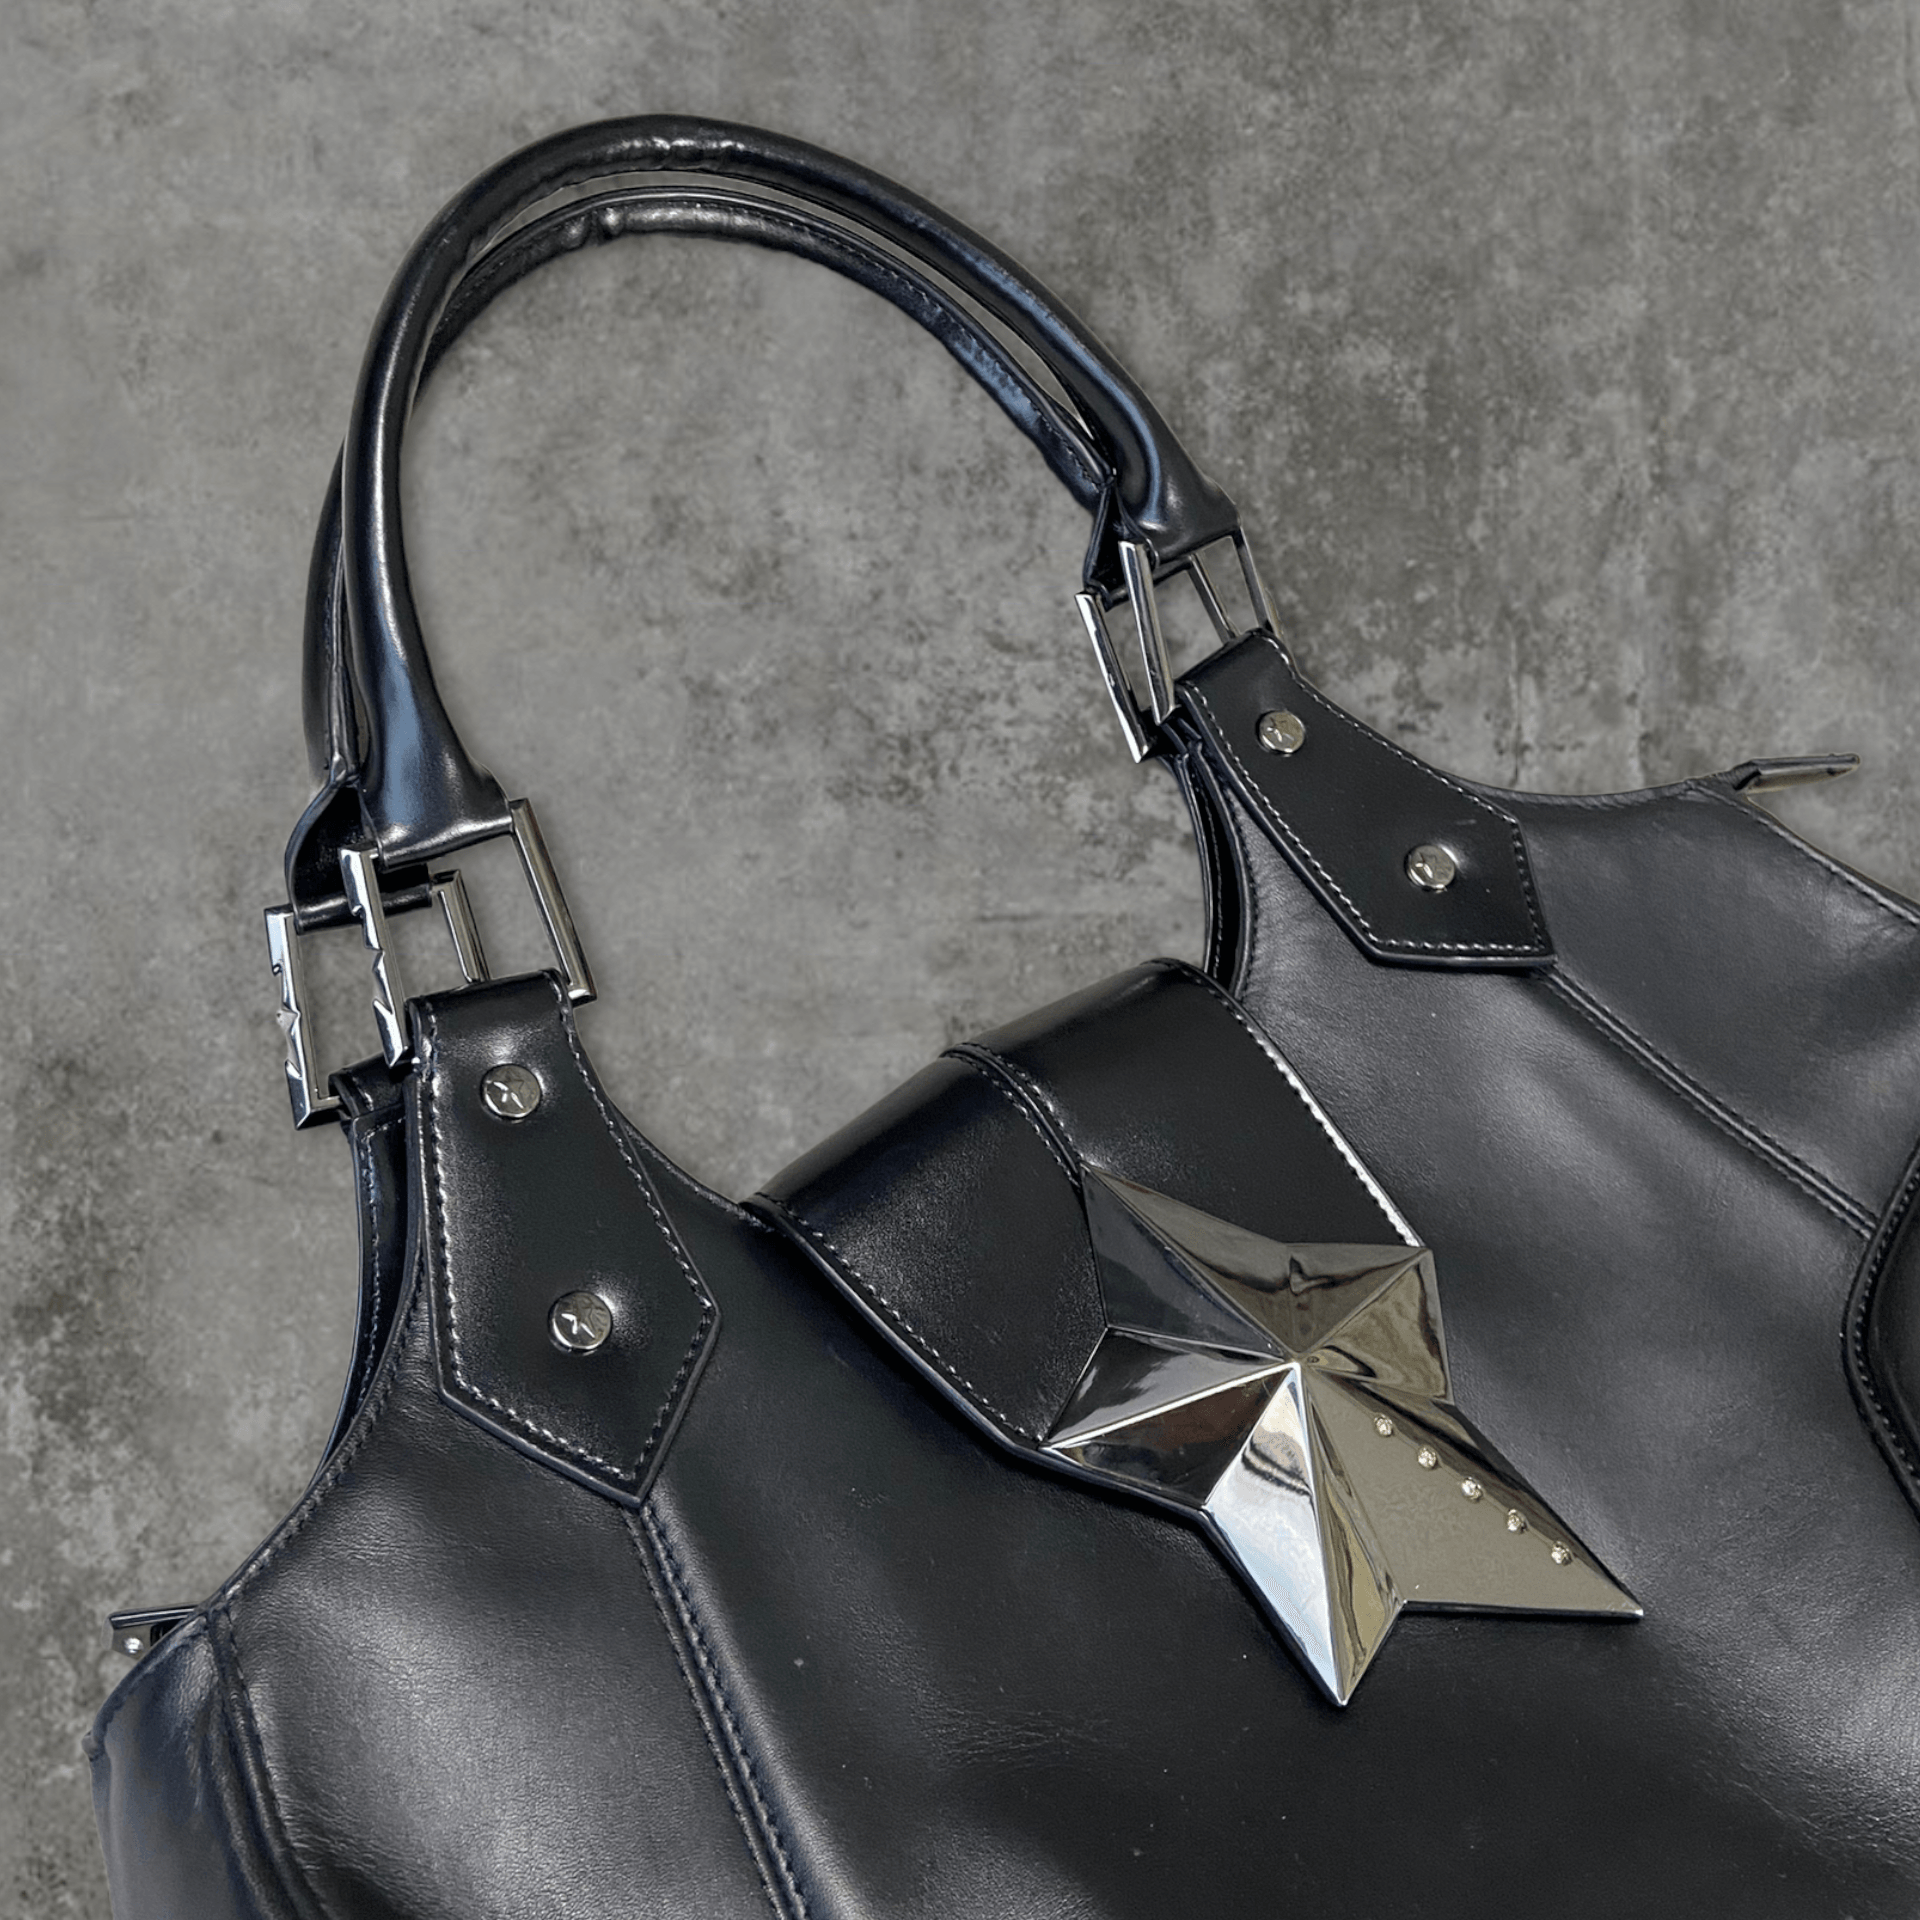 THIERRY MUGLER LEATHER AND CHROME STAR BAG - Known Source